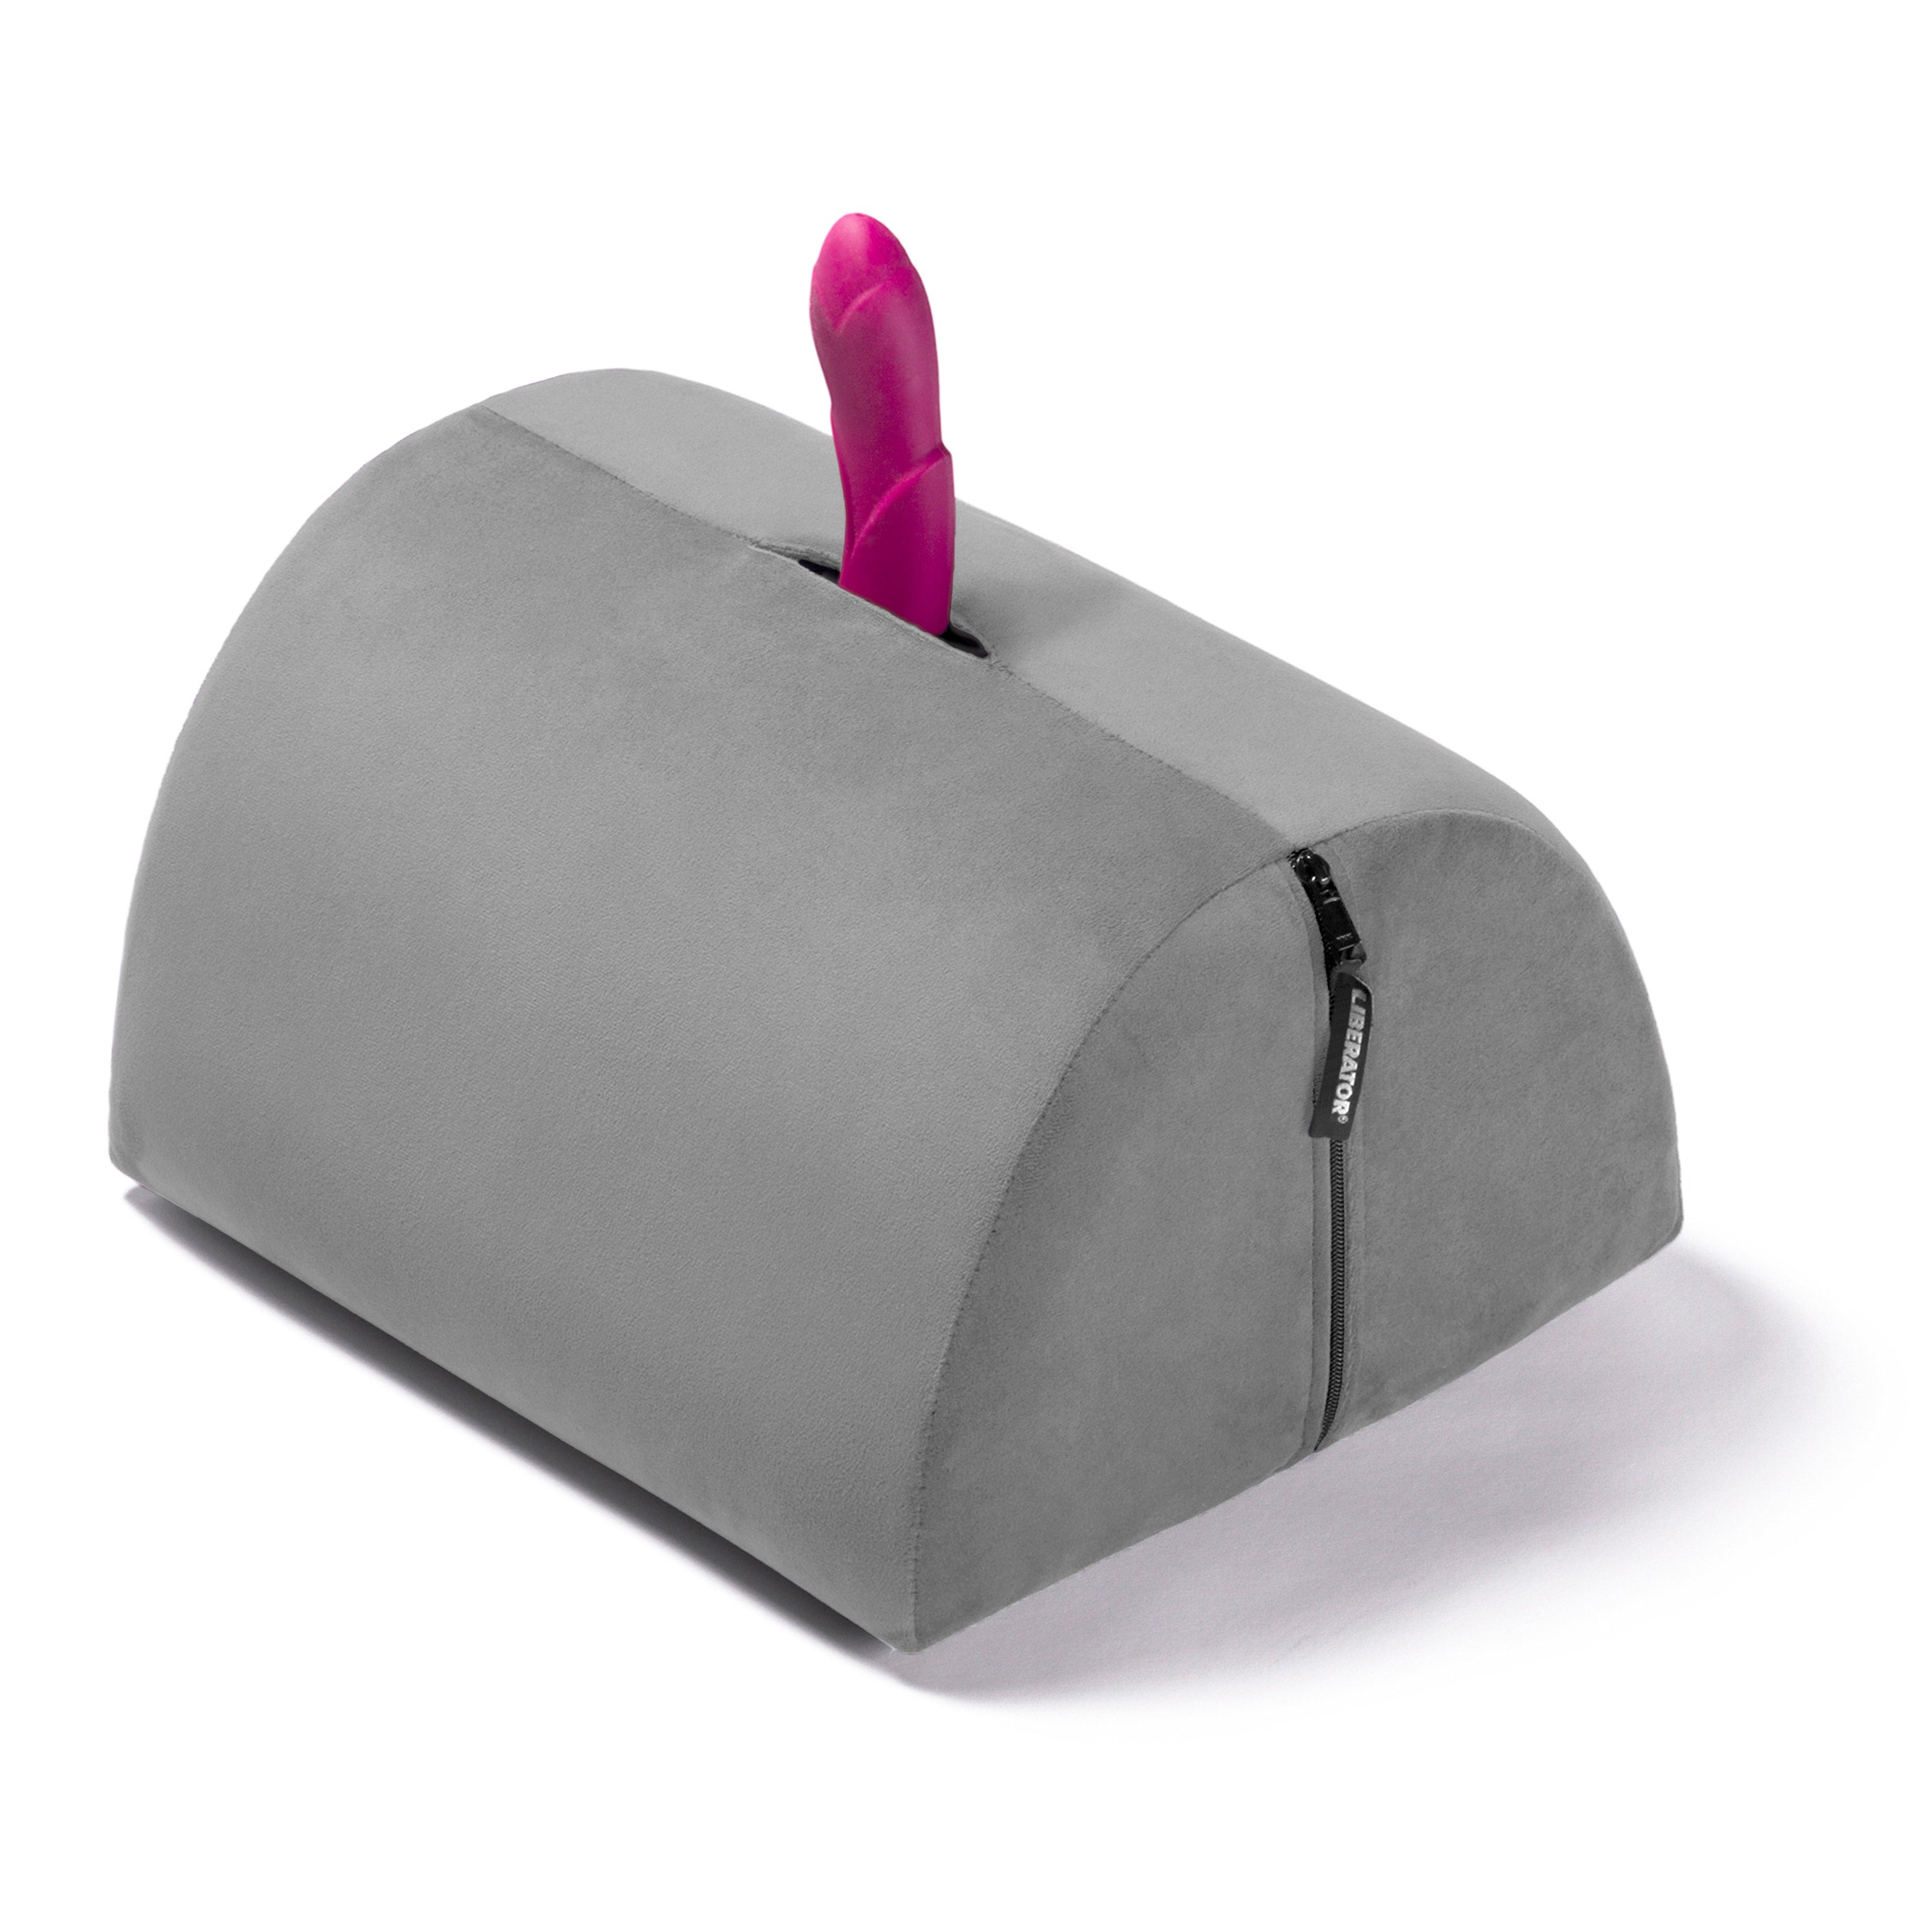 The Liberator BonBon: A gray sex toy mount with a flat base and a rounded top. Poking out from the top is a pink dildo.